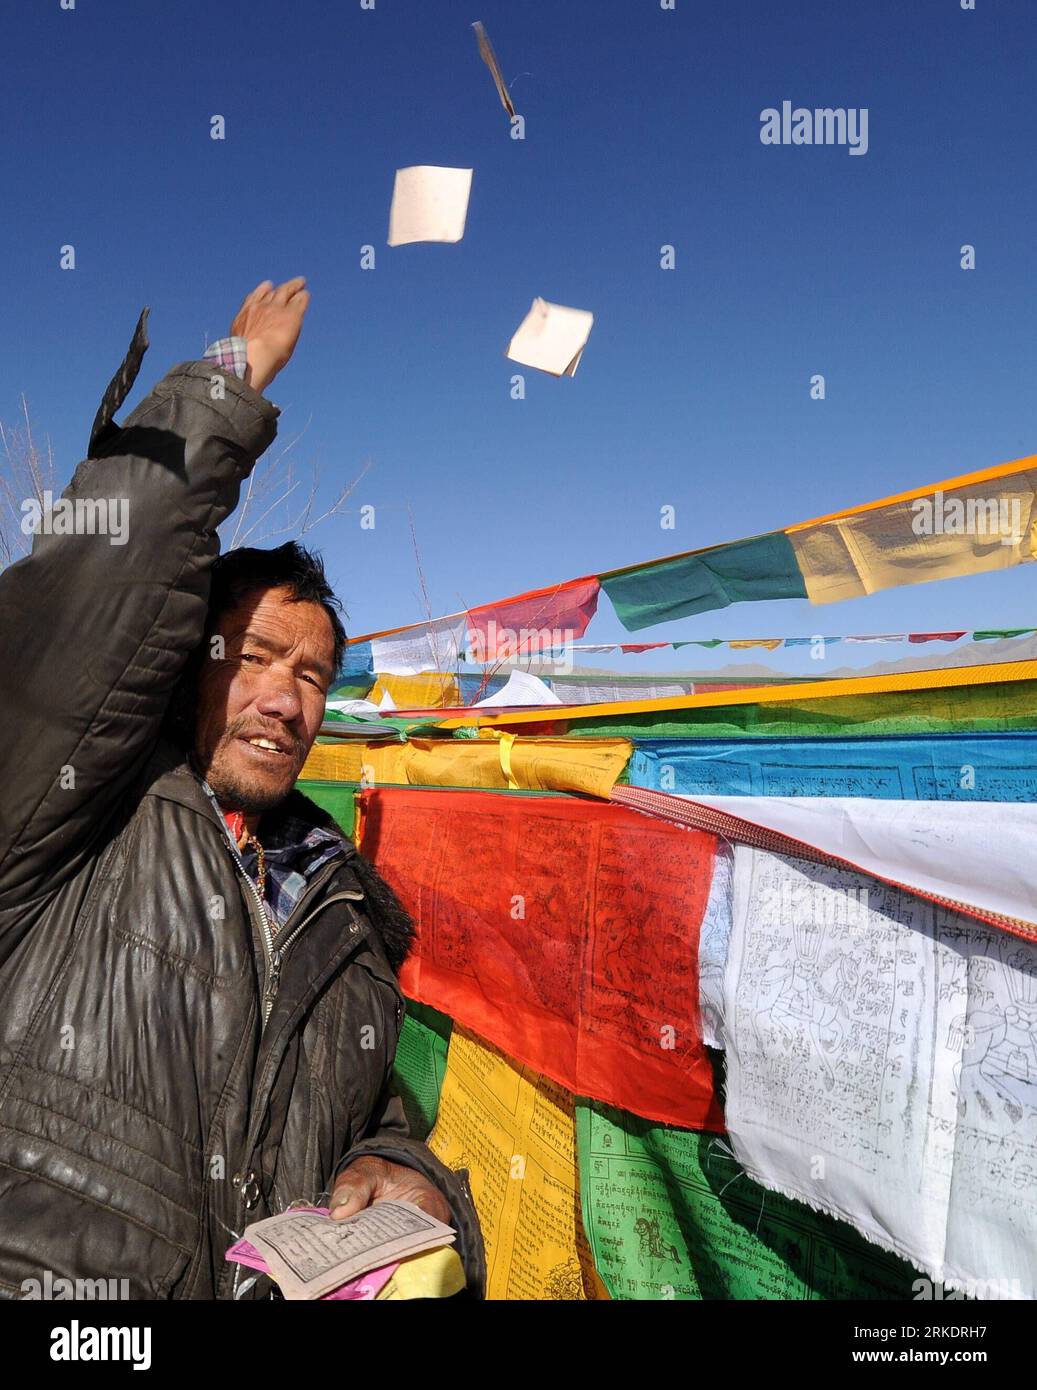 Bildnummer: 54990901  Datum: 07.03.2011  Copyright: imago/Xinhua (110307) -- LHASA, March 7, 2011 (Xinhua) -- A man throw small prayer flags into the air to pray for good luck in Lhasa, capital of southwest China s Tibet Autonomous Region, March 7, 2011, the third day of Tibetan New Year or Losar. Losar can be traced back to the pre-Buddhist period in Tibet when Tibetans practised the Bon religion. (Xinhua/Chogo) (lfj) CHINA-TIBET-LOSAR CELEBRATION (CN) PUBLICATIONxNOTxINxCHN Gesellschaft kbdig xub 2011 hoch o0 Tradition Neujahr  o0 Tradition Neujahr Gebetsfahnen   Gebetsflaggen   Gebetsfahne Stock Photo